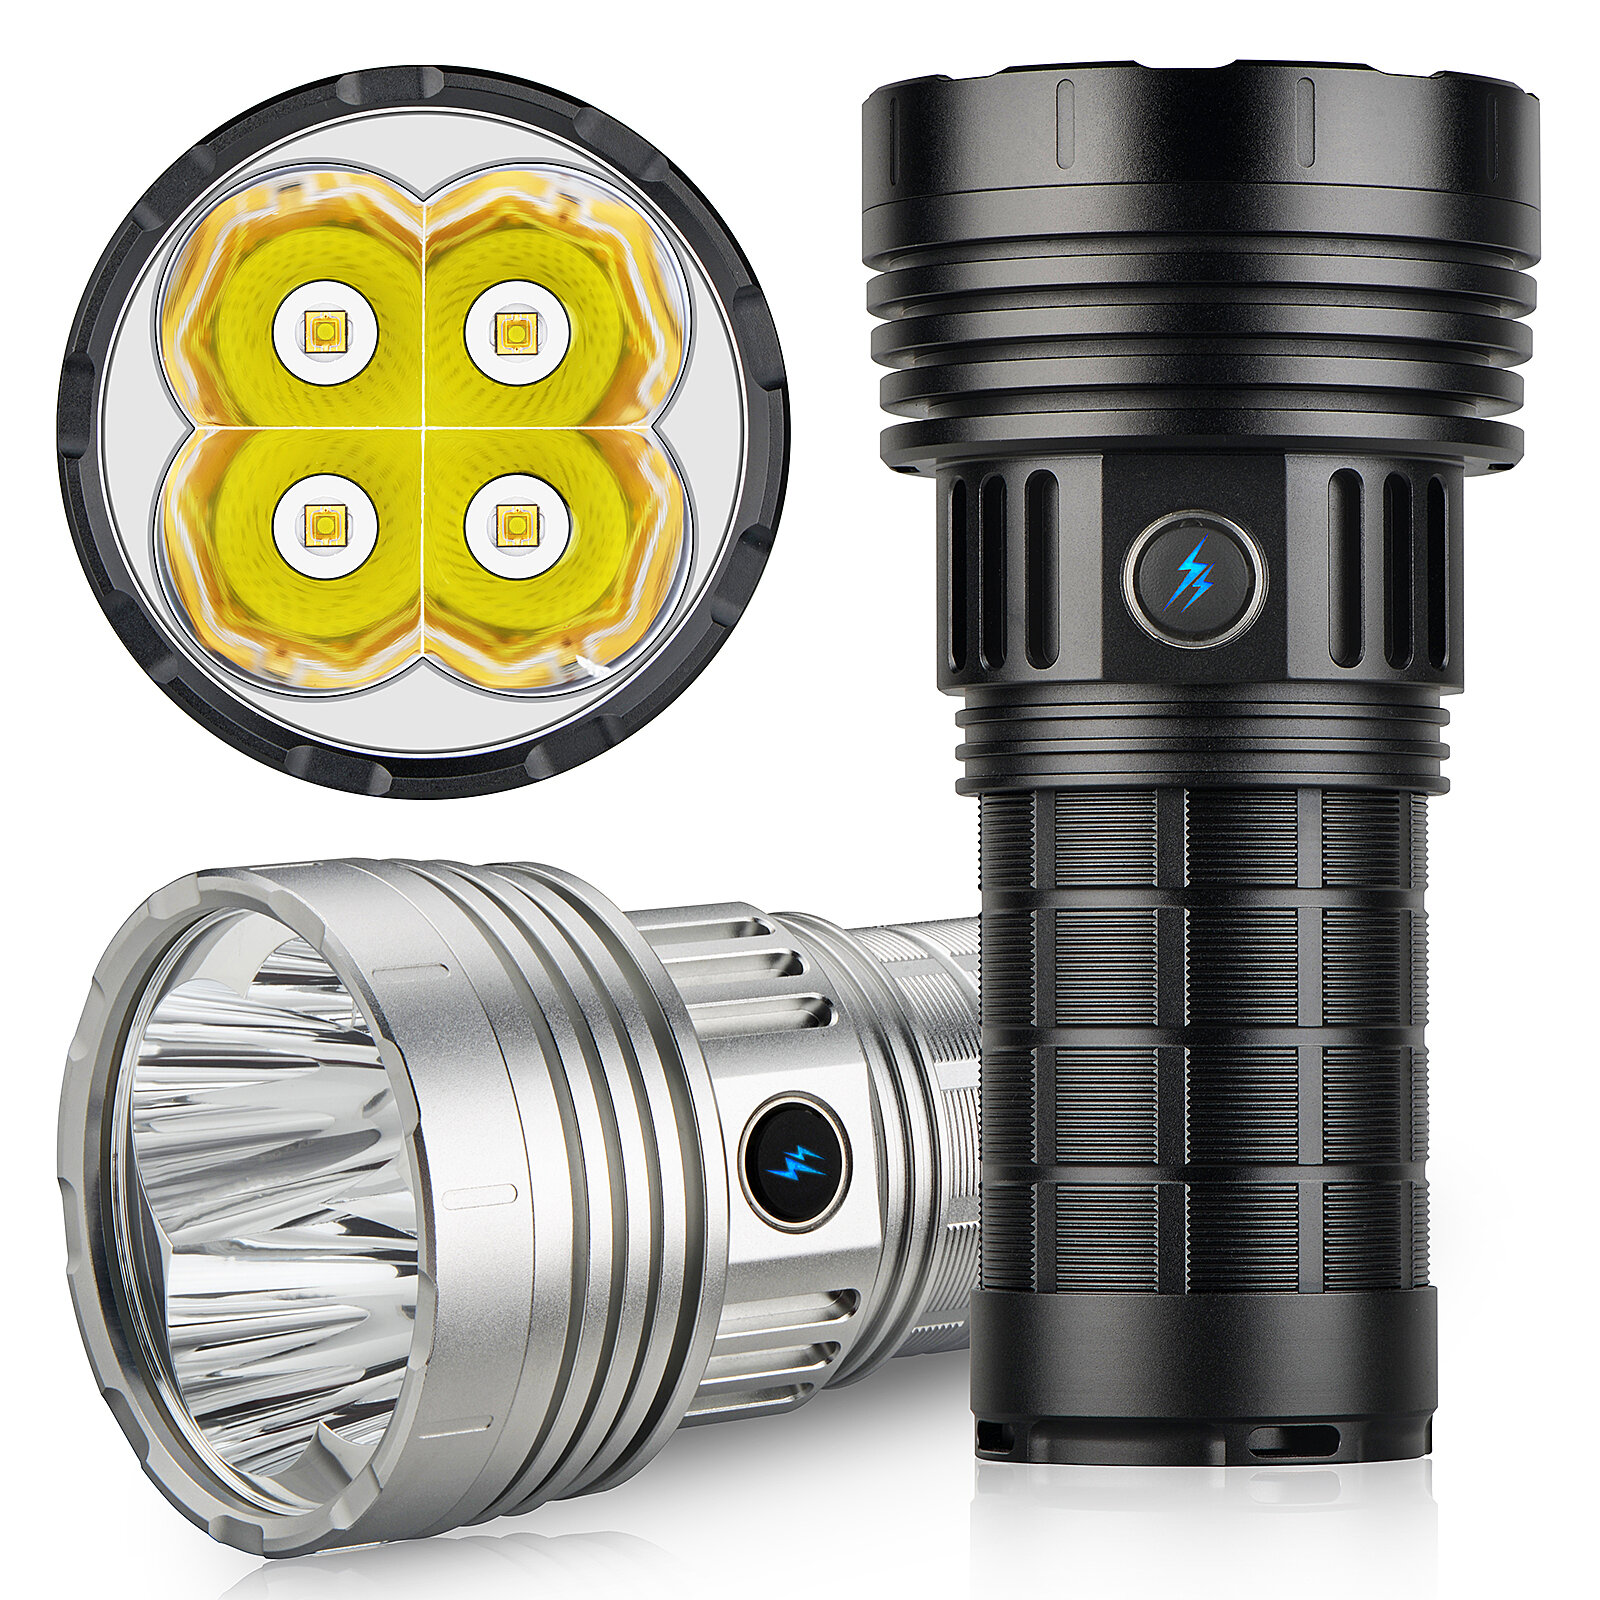 

HAIKELITE HG50 4*G50 LED High Powered 21700 Flashlight Type-C Rechargeable Powerful Portable LED Torch for Outdoor Hikin